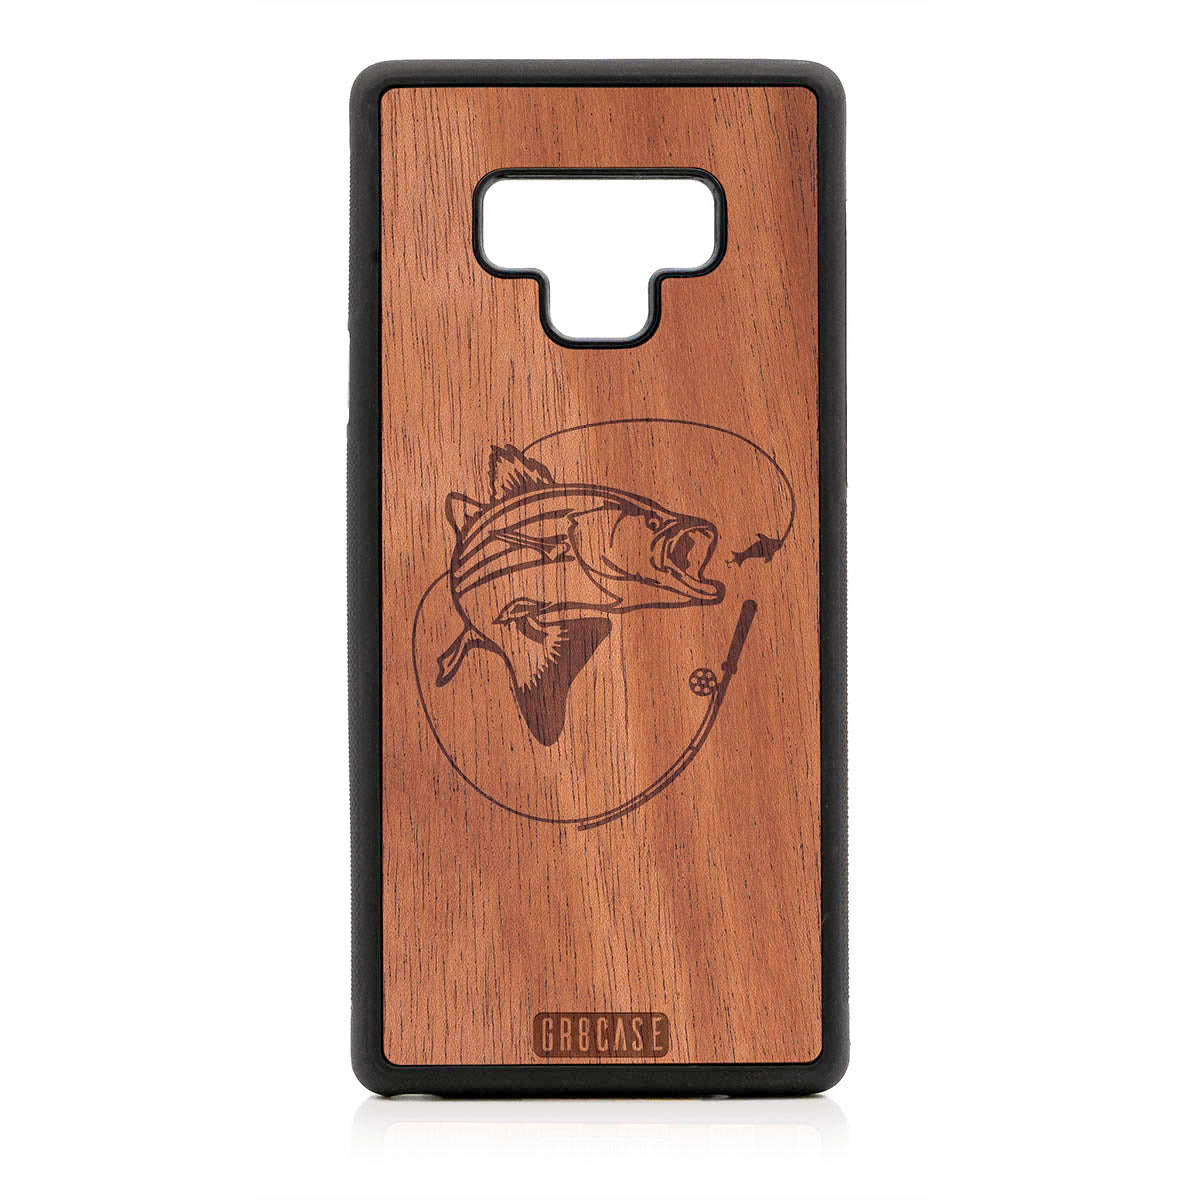 Fish and Reel Design Wood Case For Samsung Galaxy Note 9 by GR8CASE